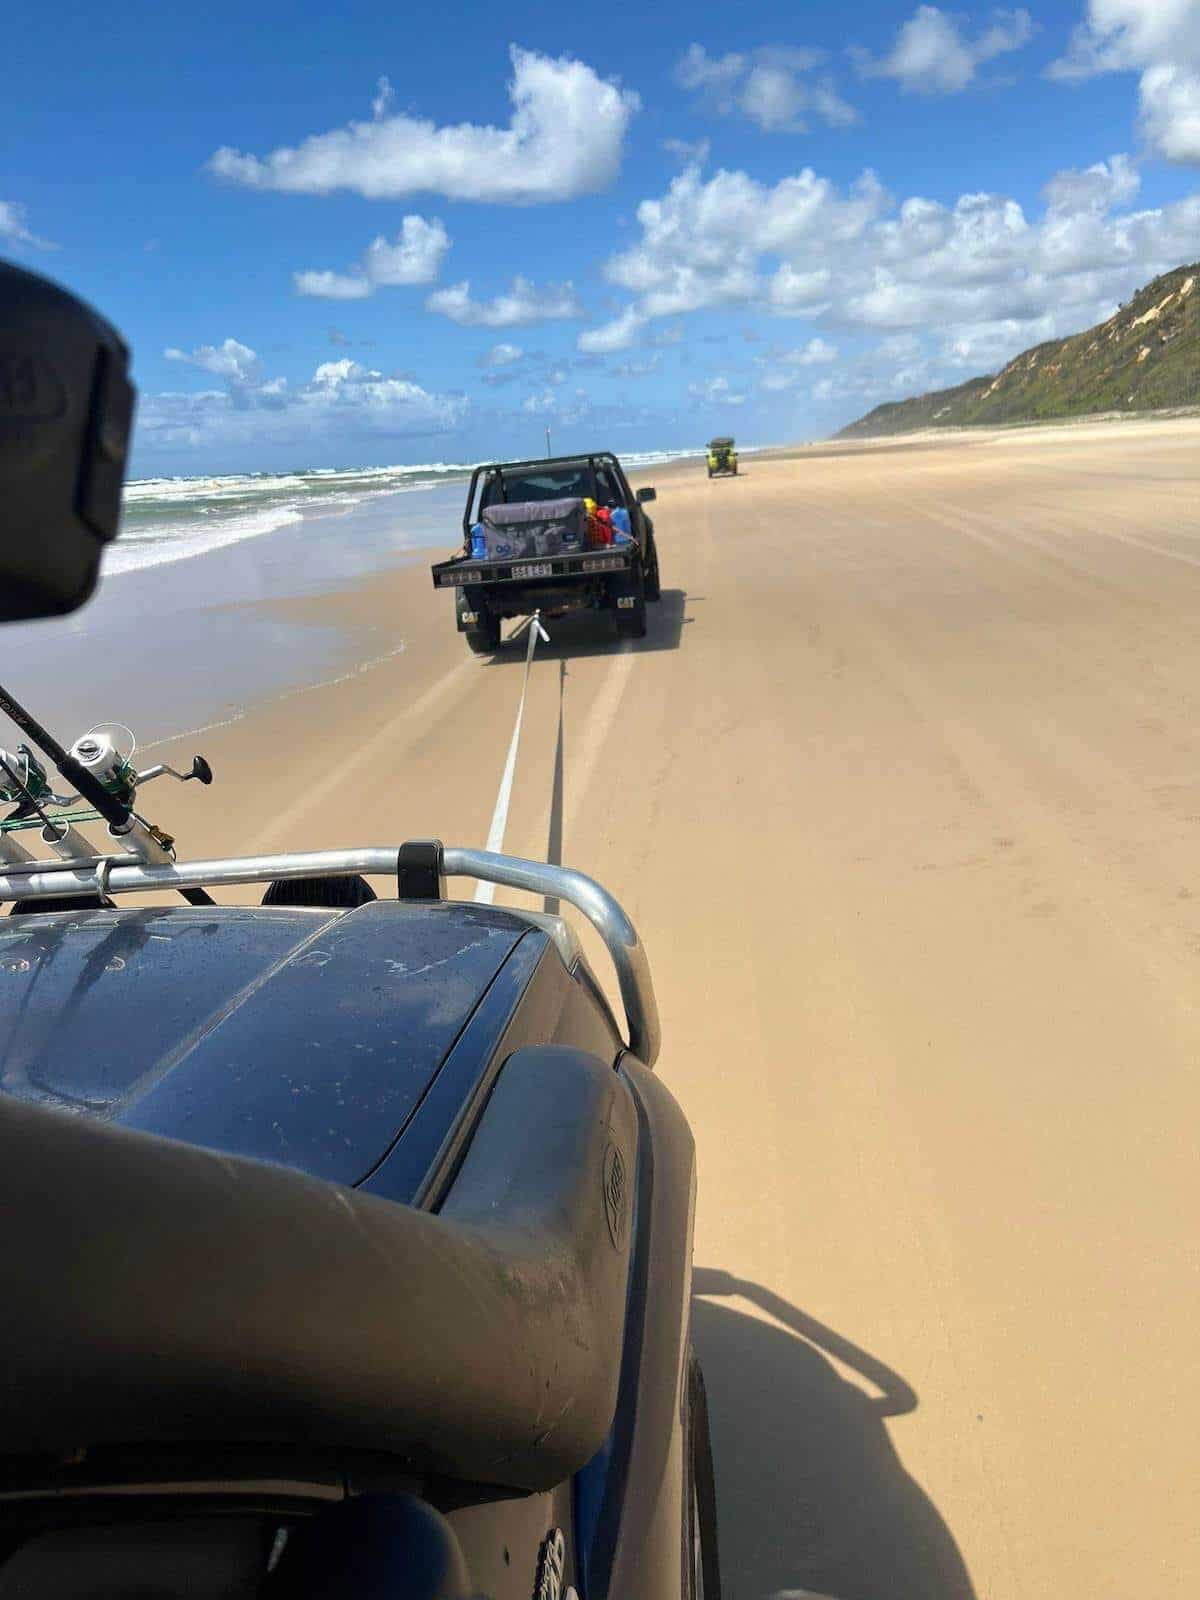 getting towed on fraser island with broken down car.